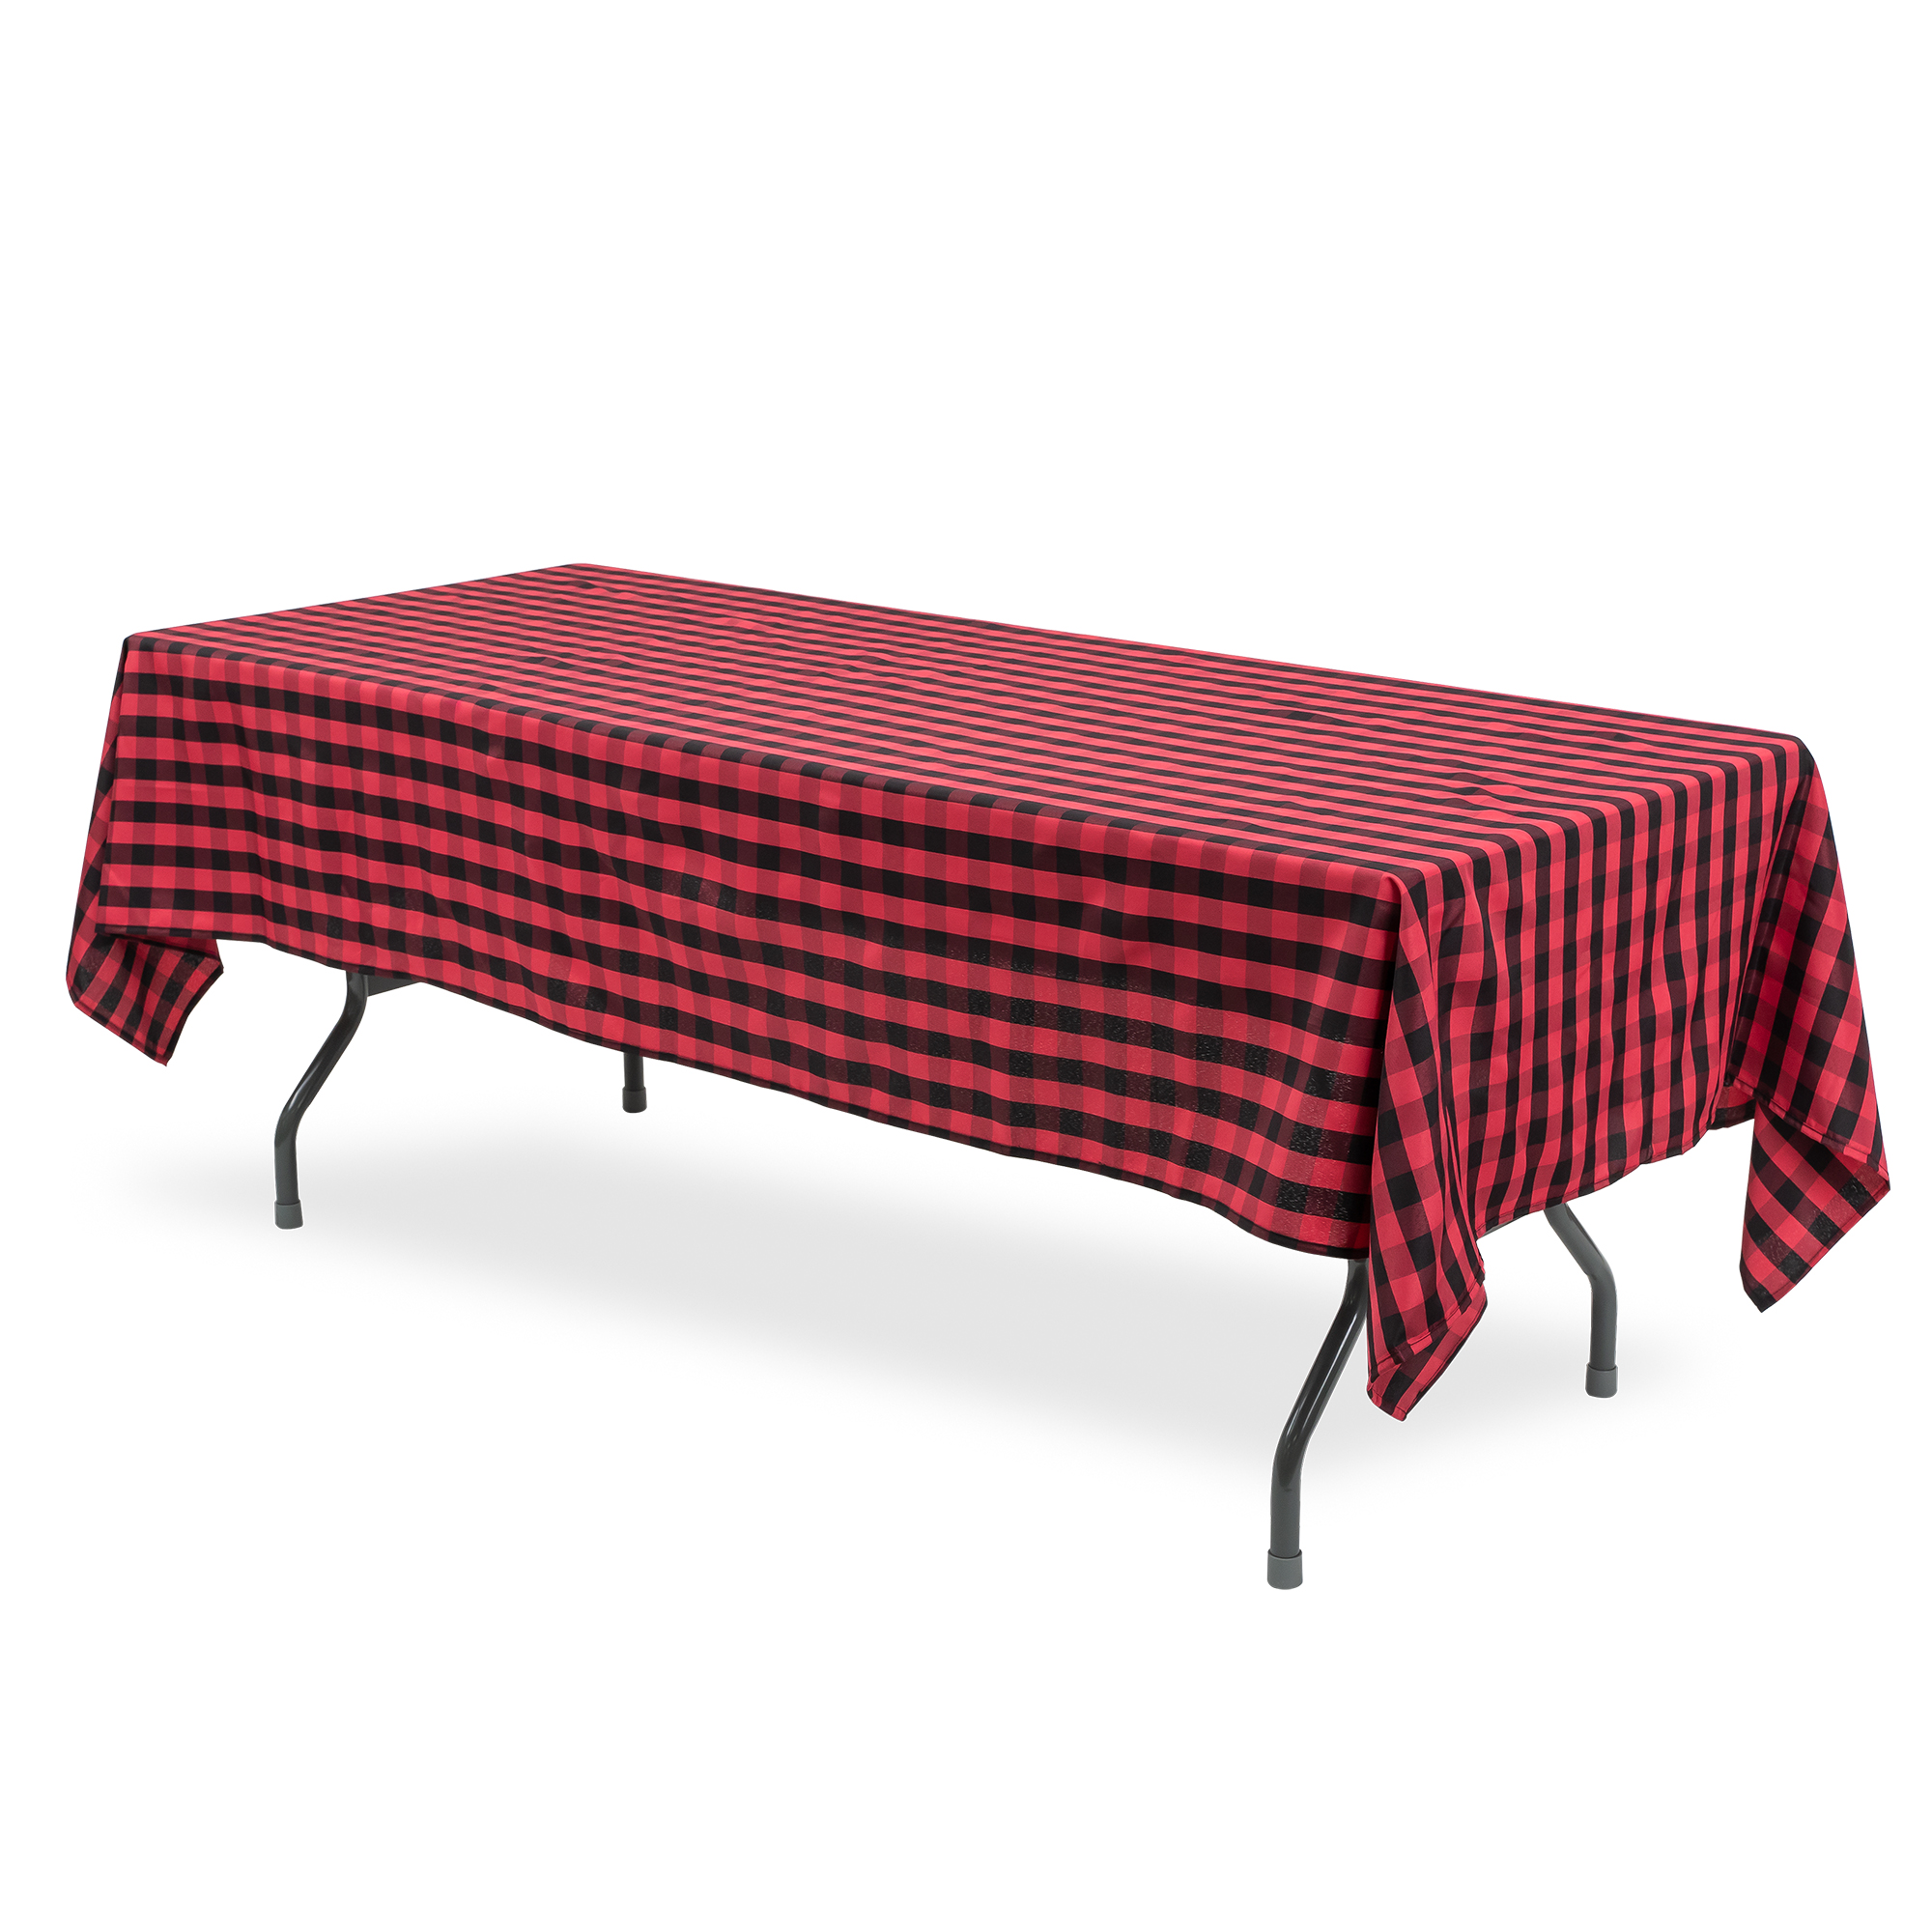 Buffalo Plaid Rectangle Polyester Table Cover 60" x 126" - Red & Black